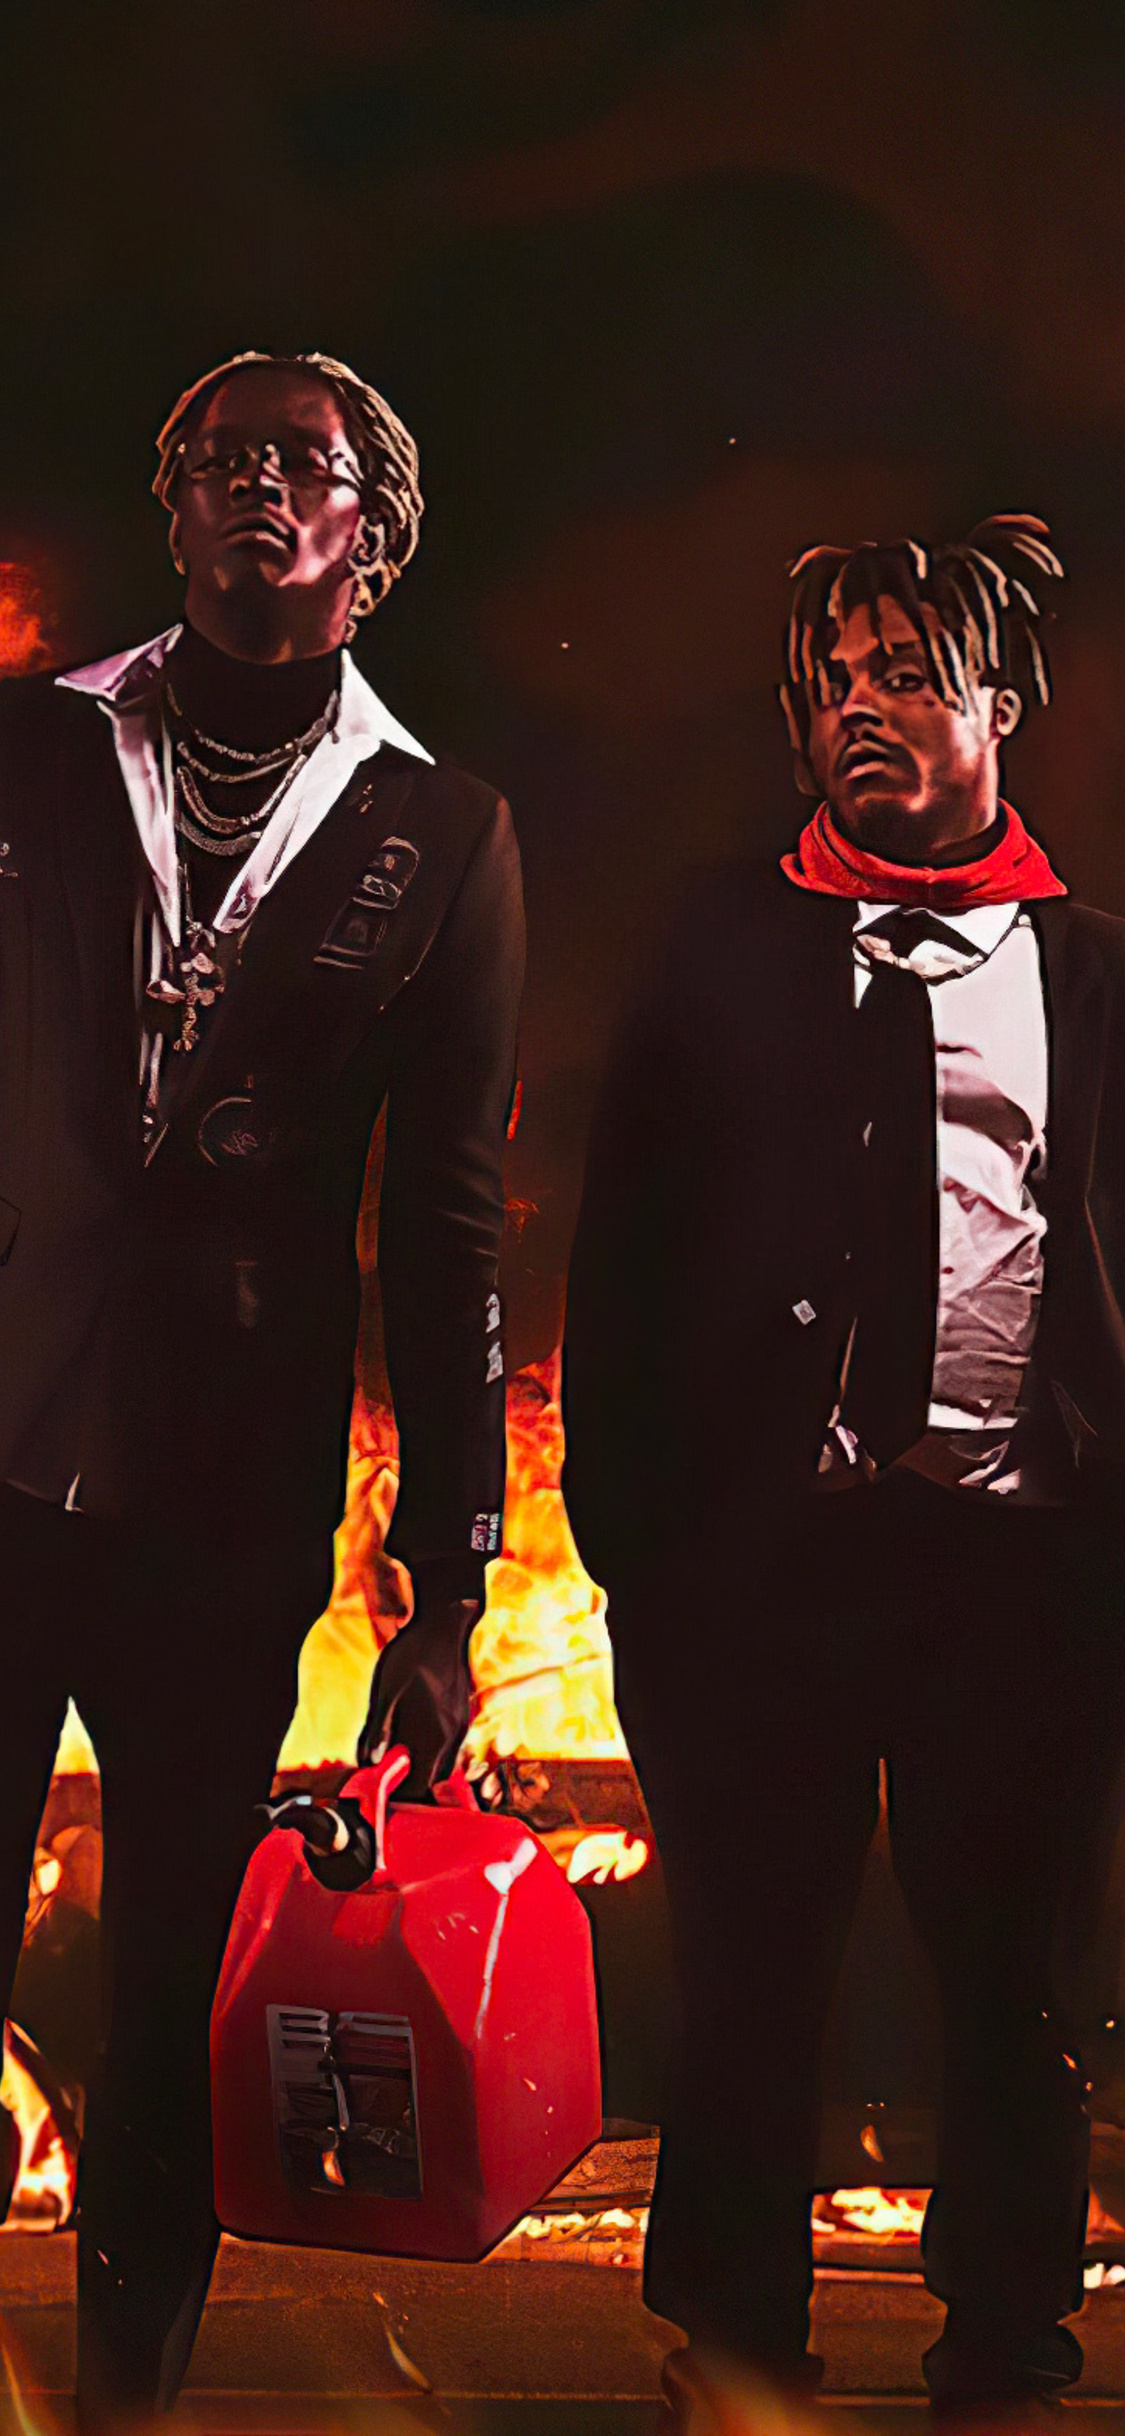 Bad Boy Juice WRLD Ft Young Thug iPhone XS, iPhone iPhone X HD 4k Wallpaper, Image, Background, Photo and Picture